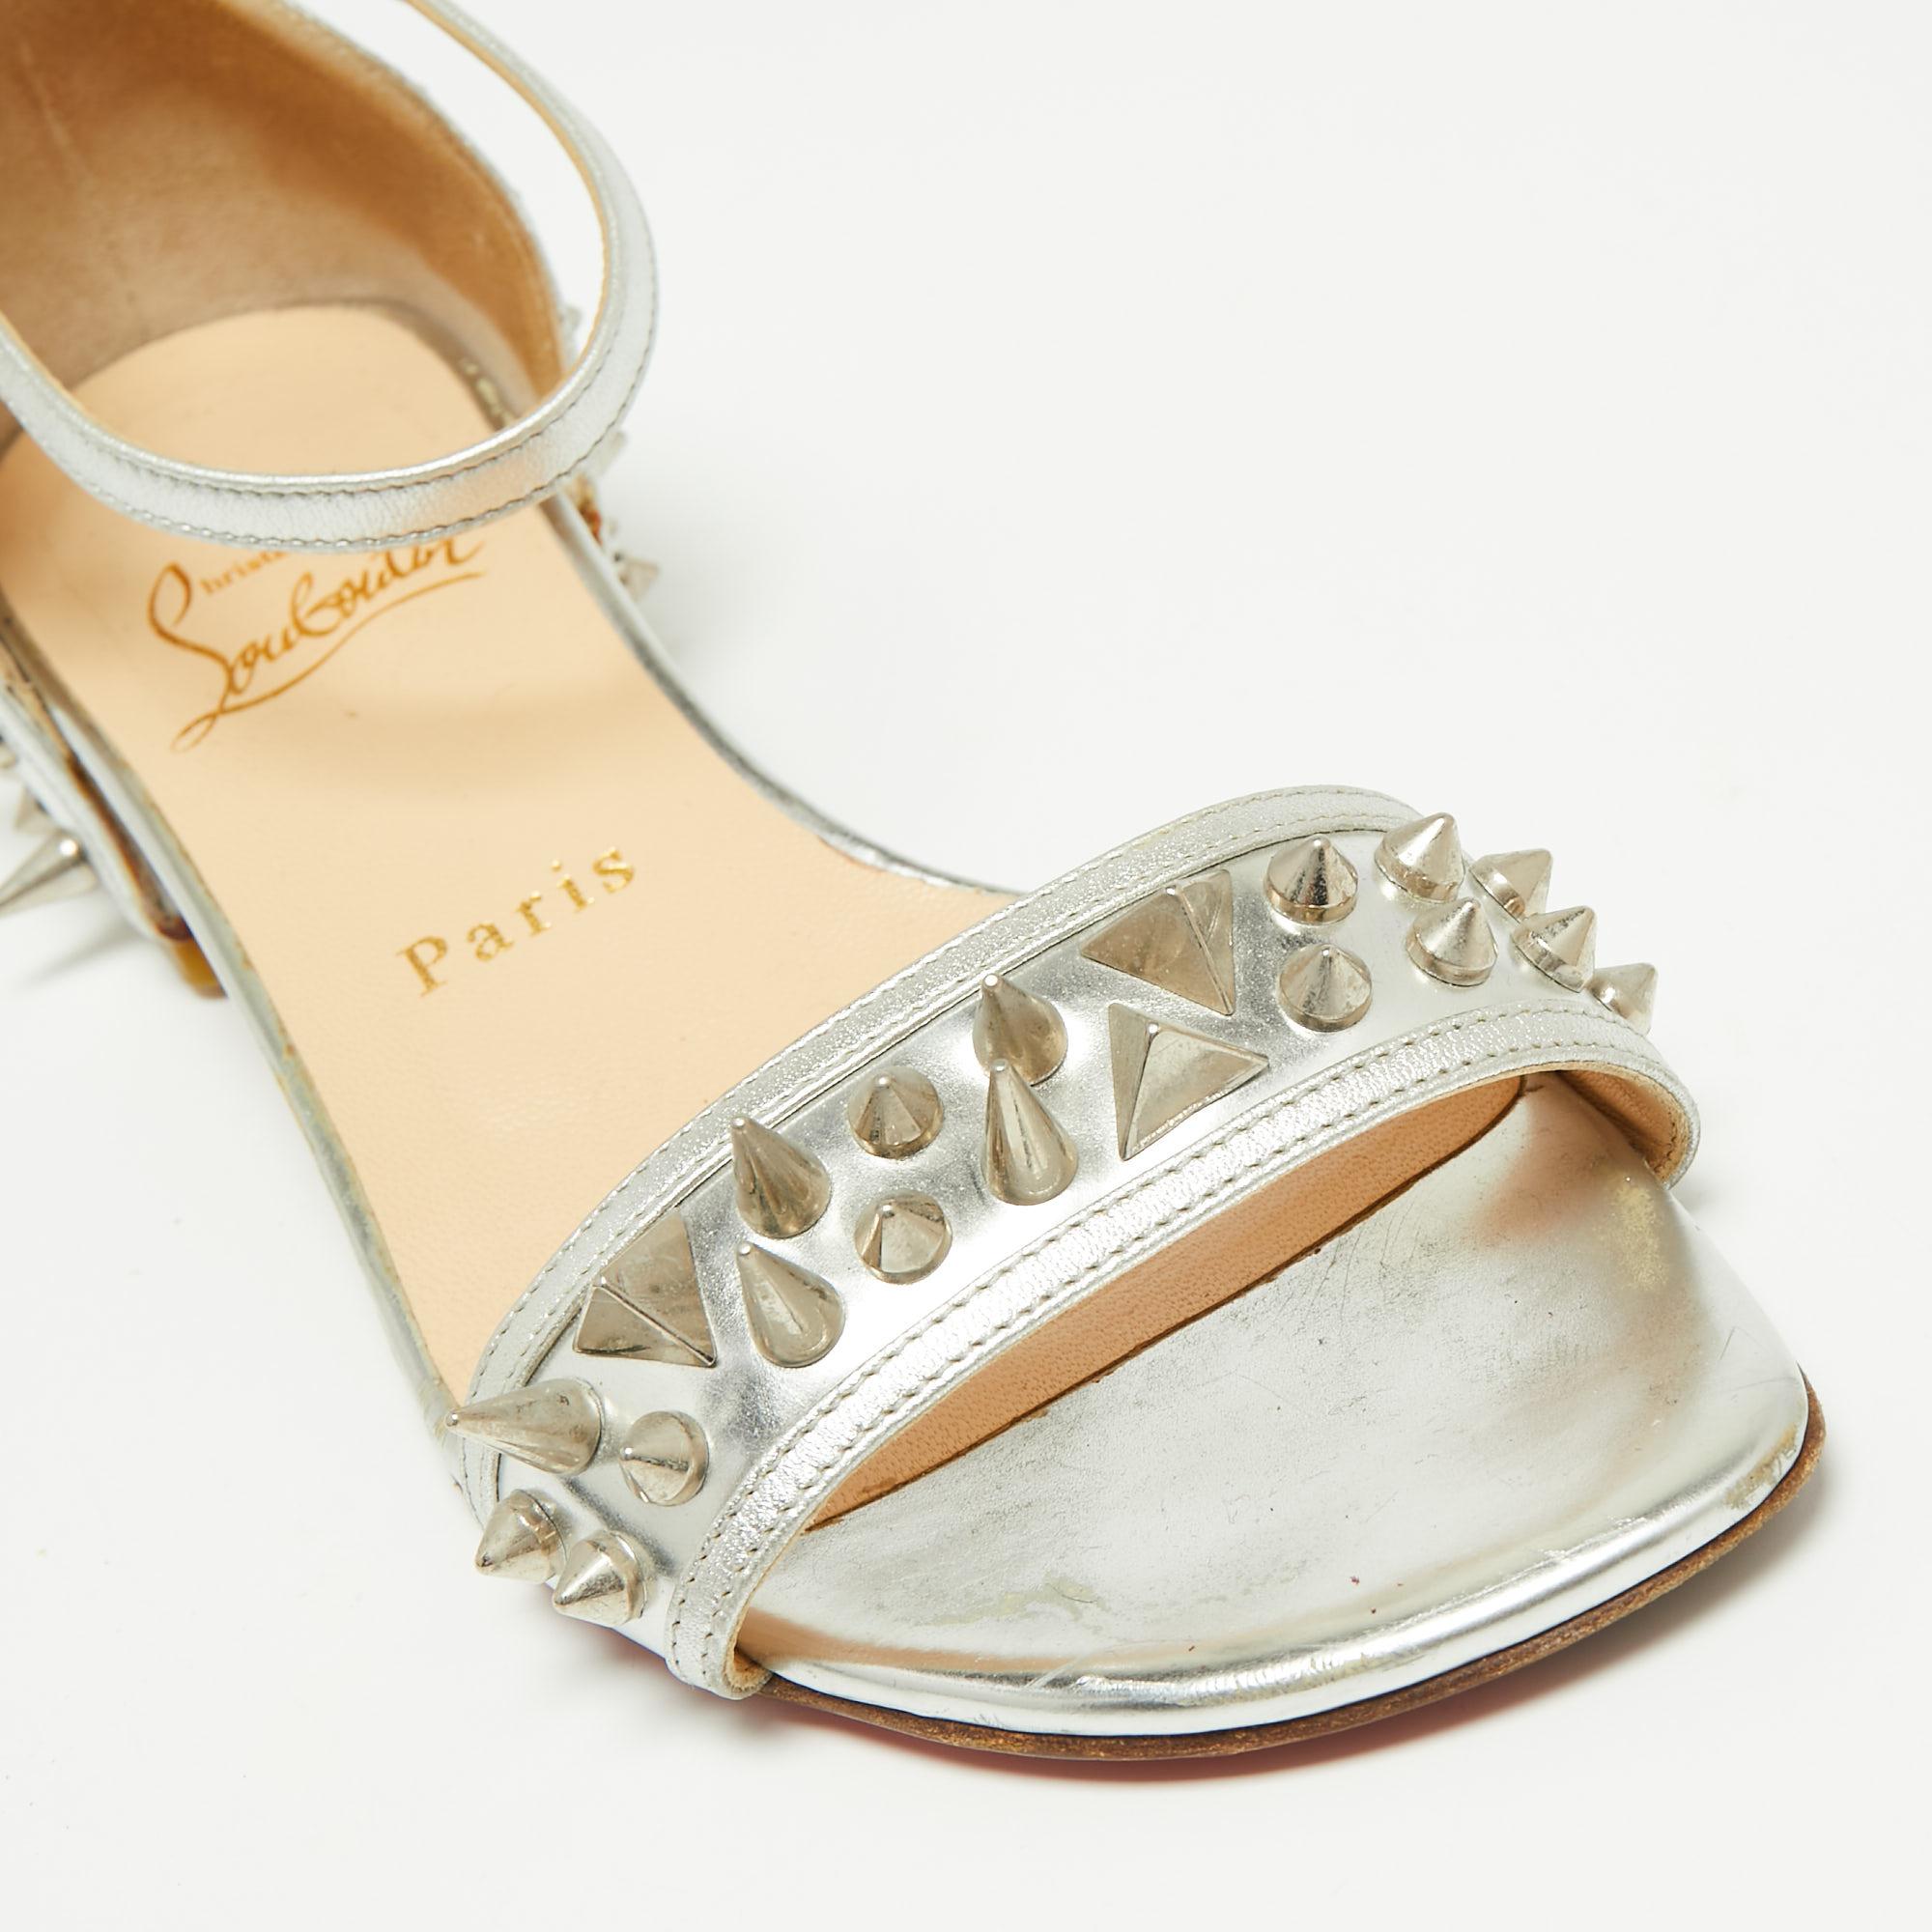 Christian Louboutin Silver Leather Studded Druide Ankle-Strap Sandals Size 35.5 For Sale 2